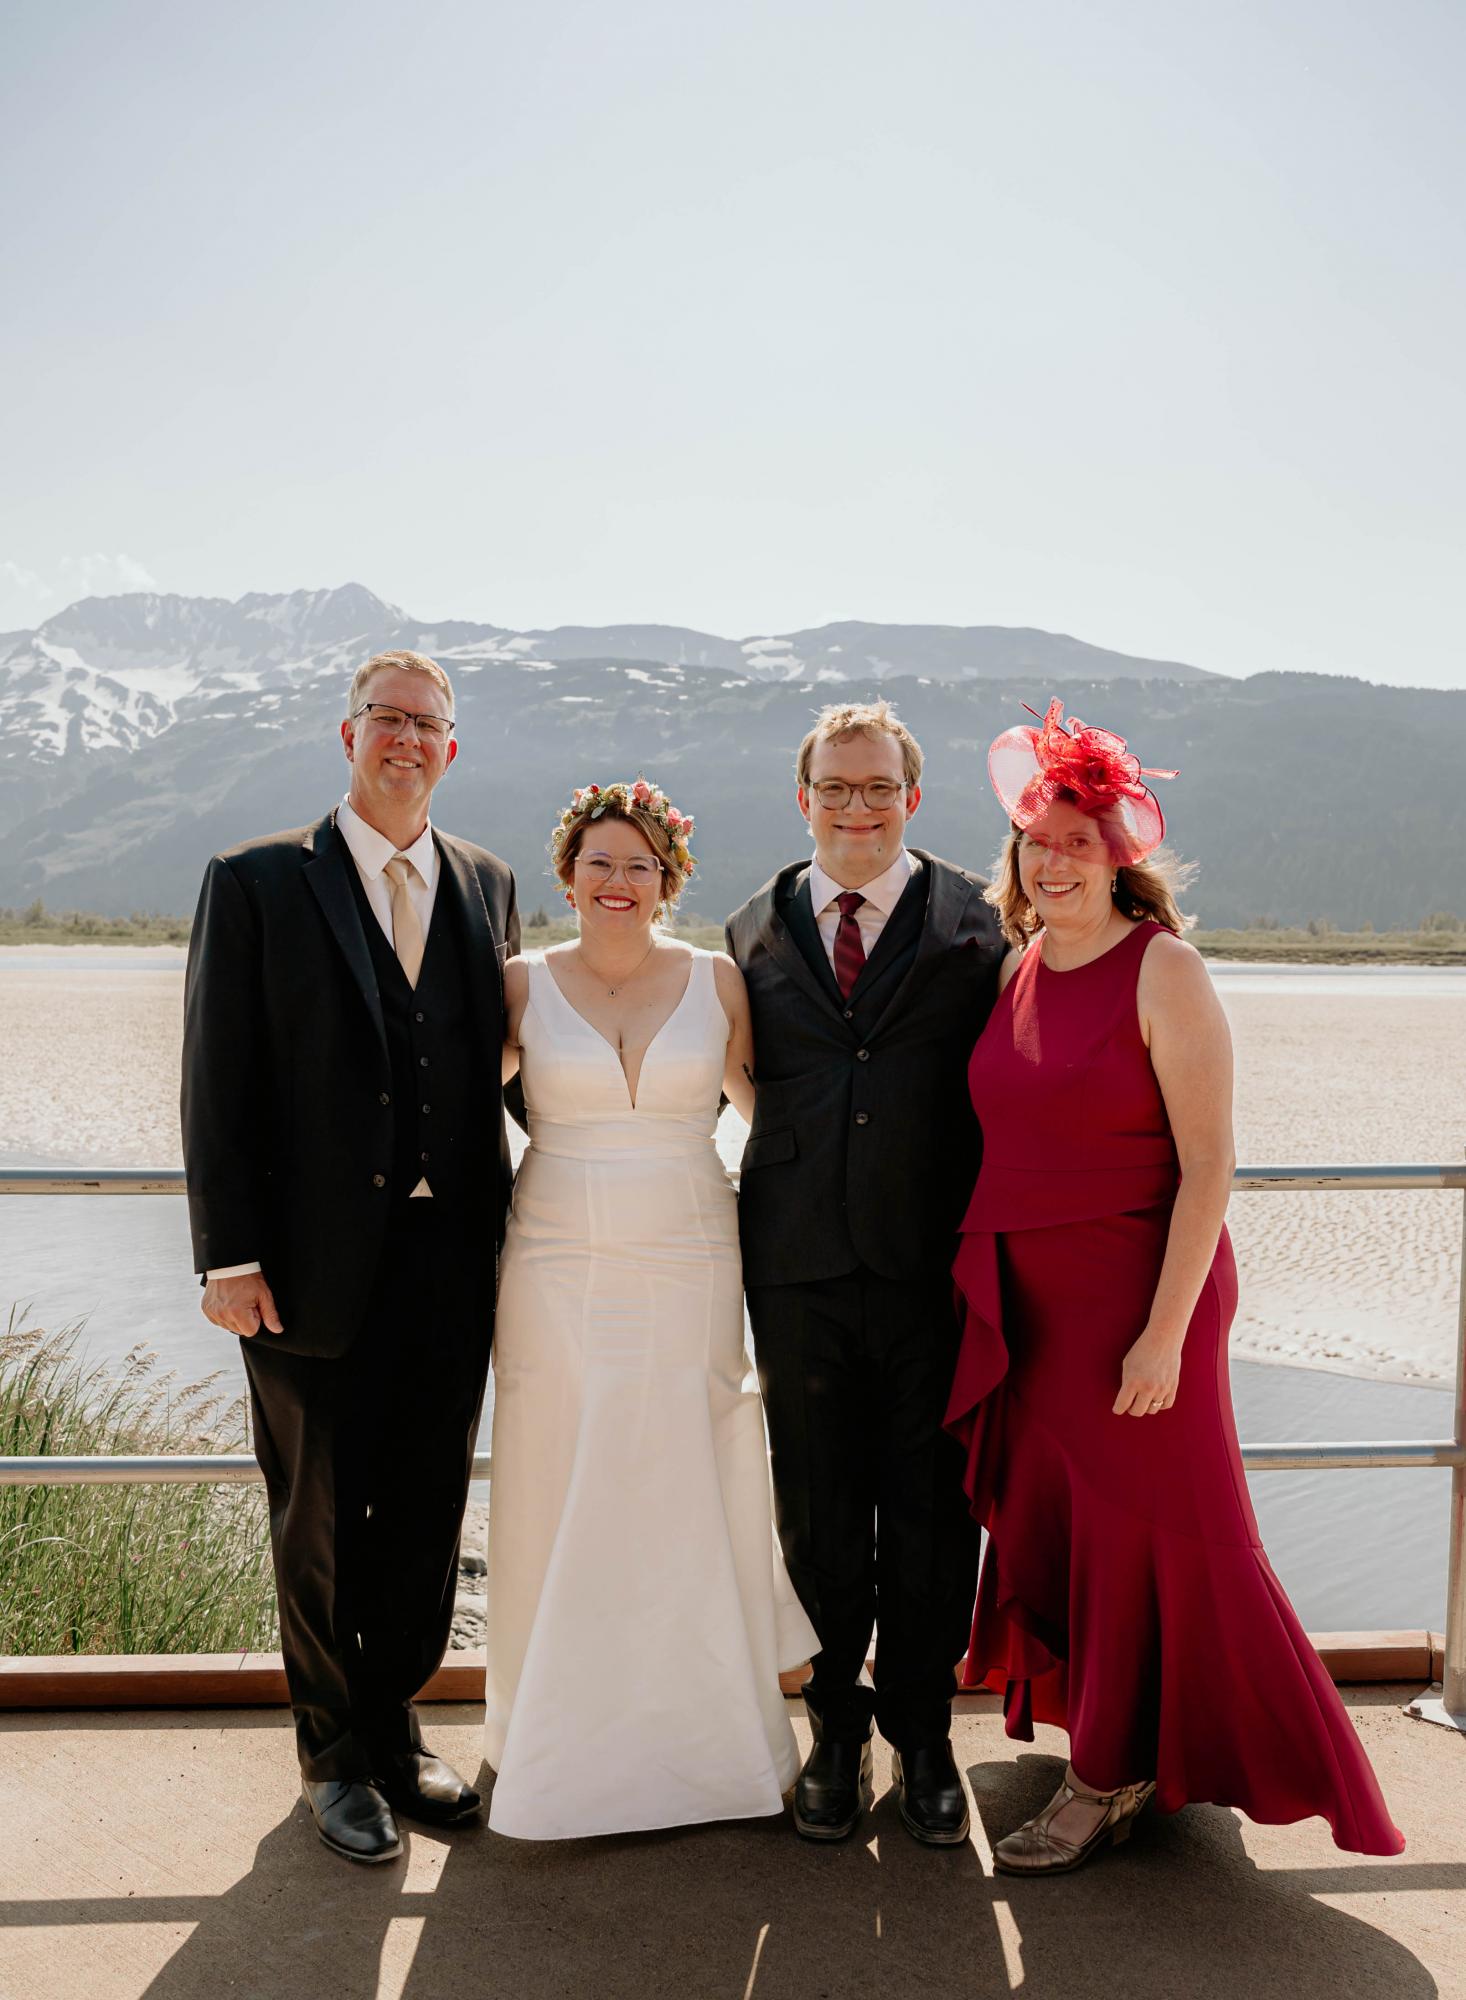 Alex Quast ’19 and Carly Williams ’19 were married at the Alaska Wildlife Conservation Center